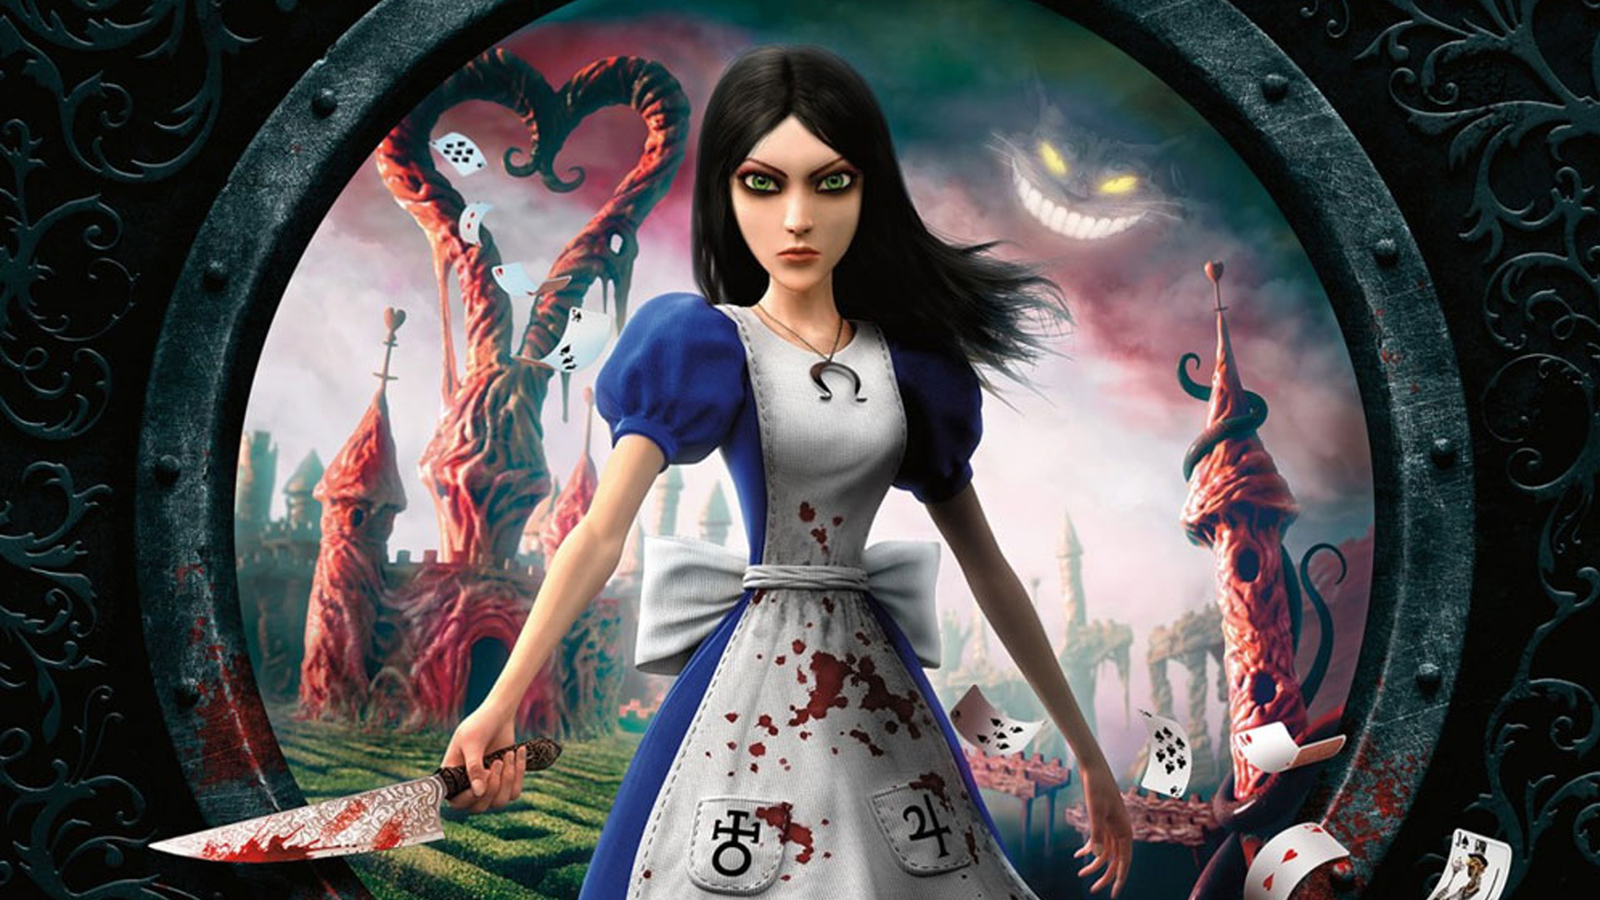 Buy Alice: Madness Returns (PC) game Online